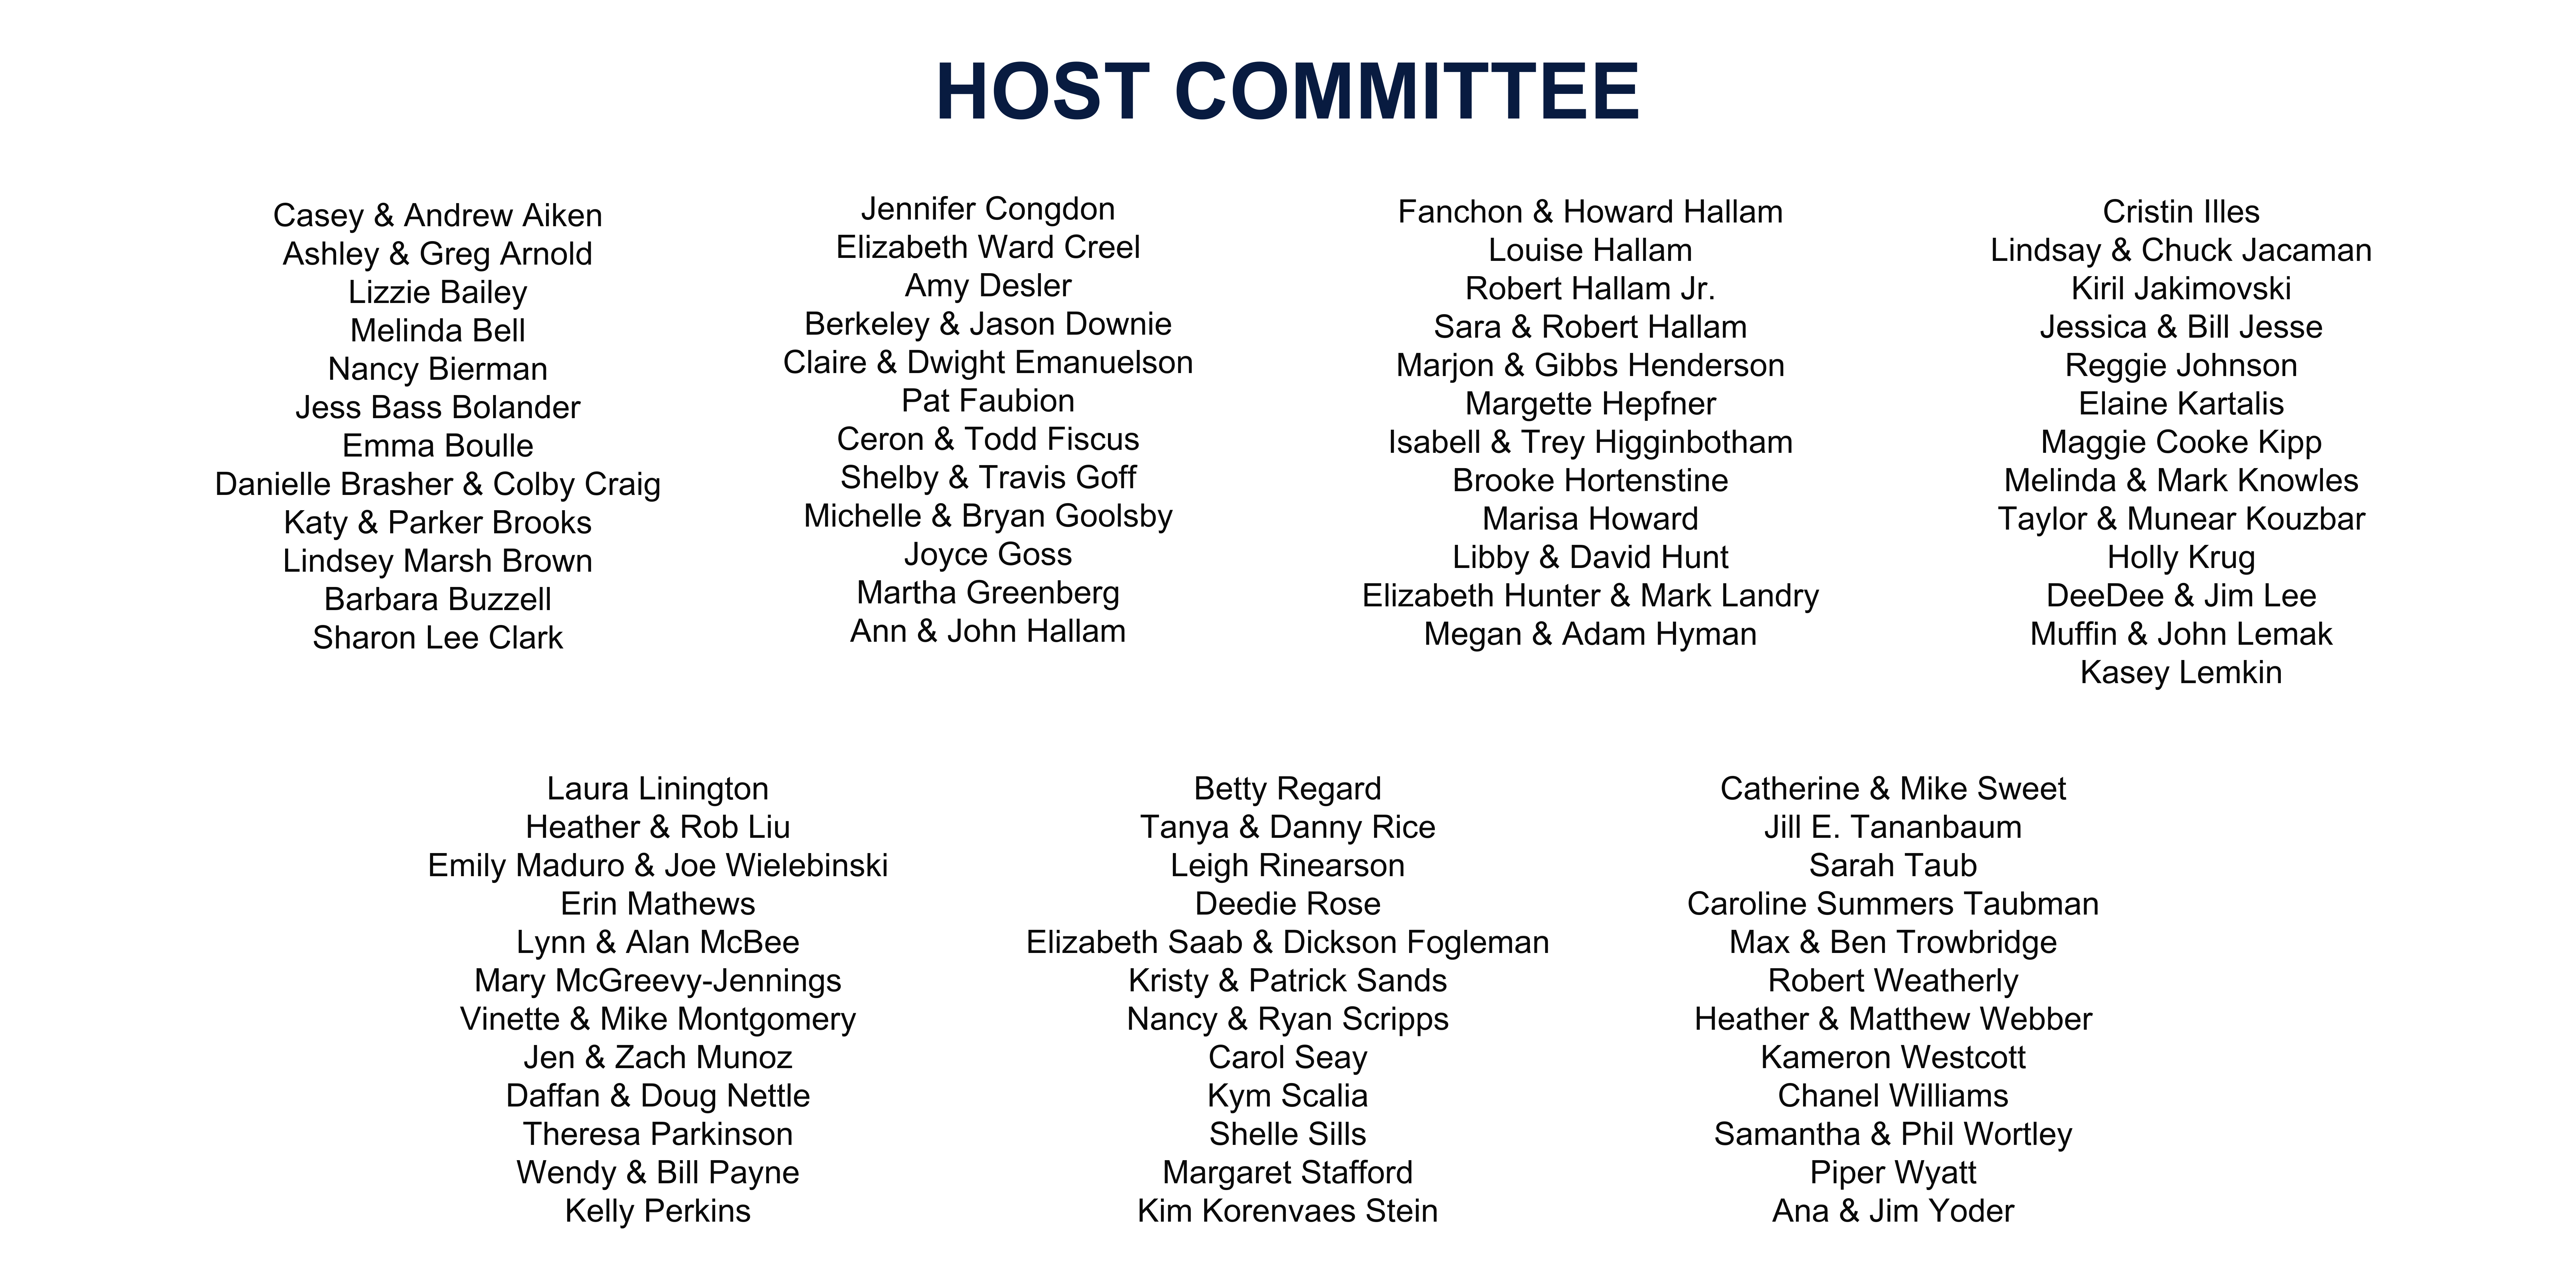 host committee image (1)